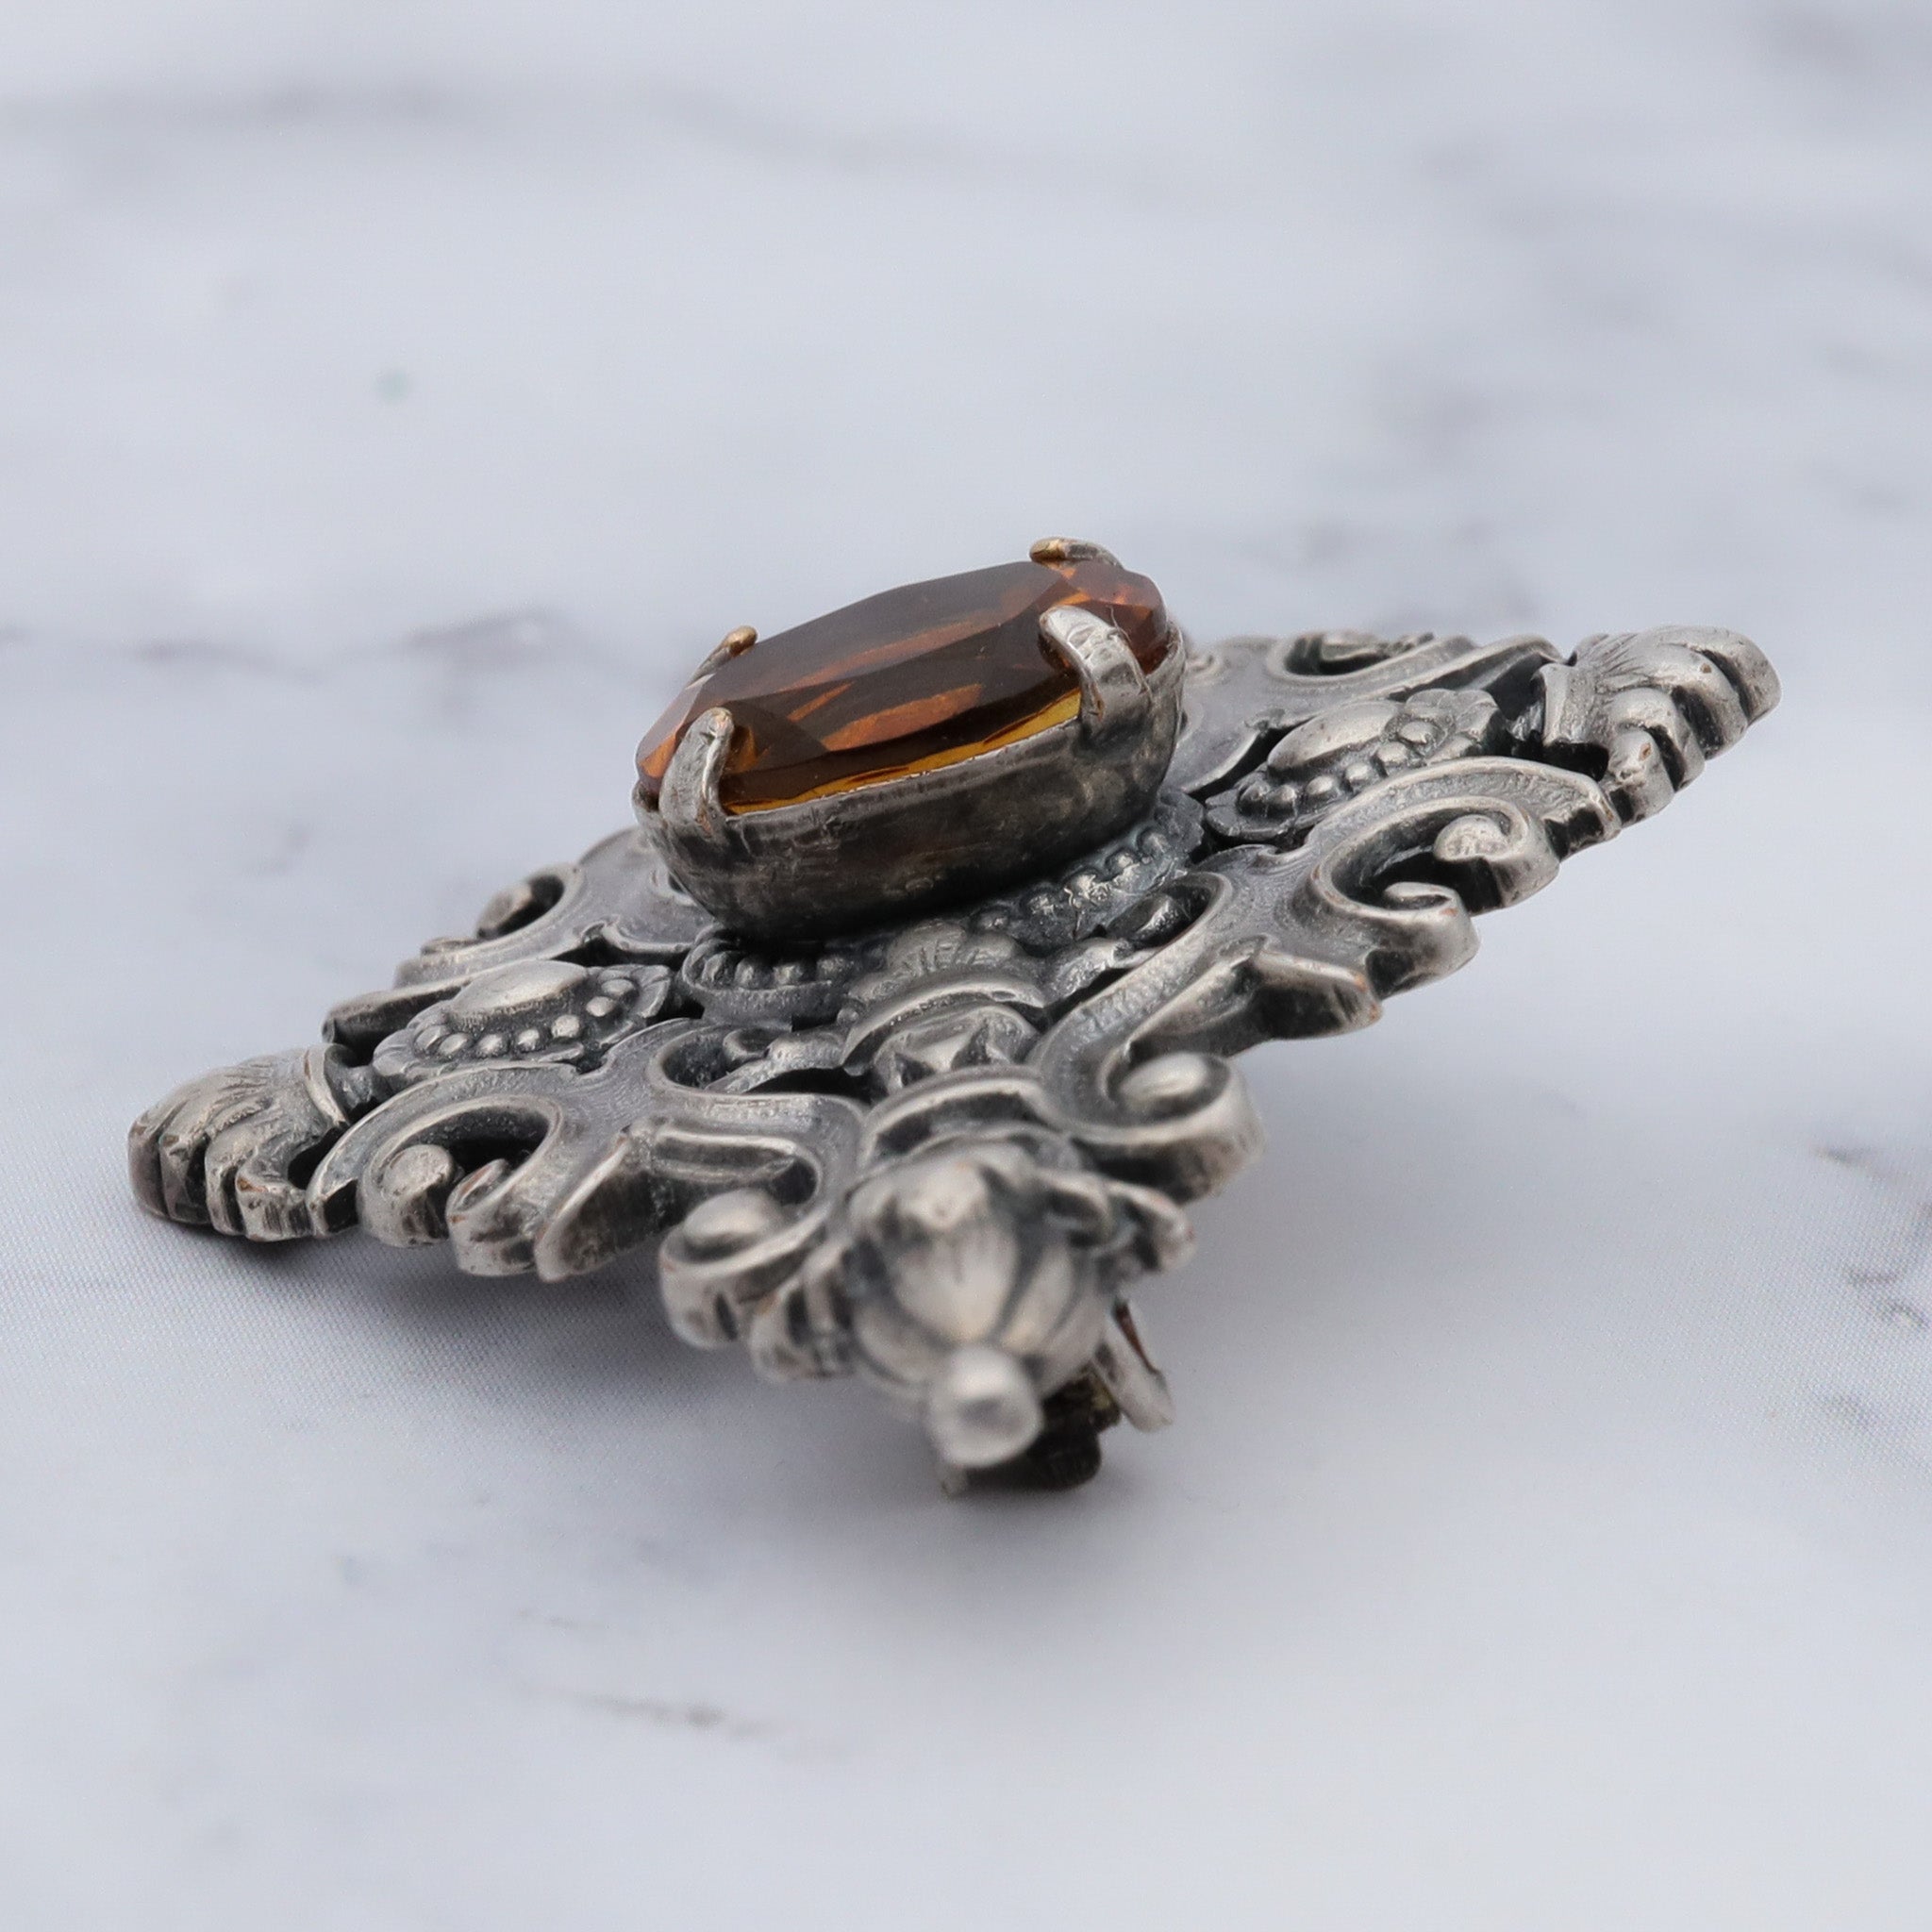 Vintage Renaissance revival style silver plated citrine brooch